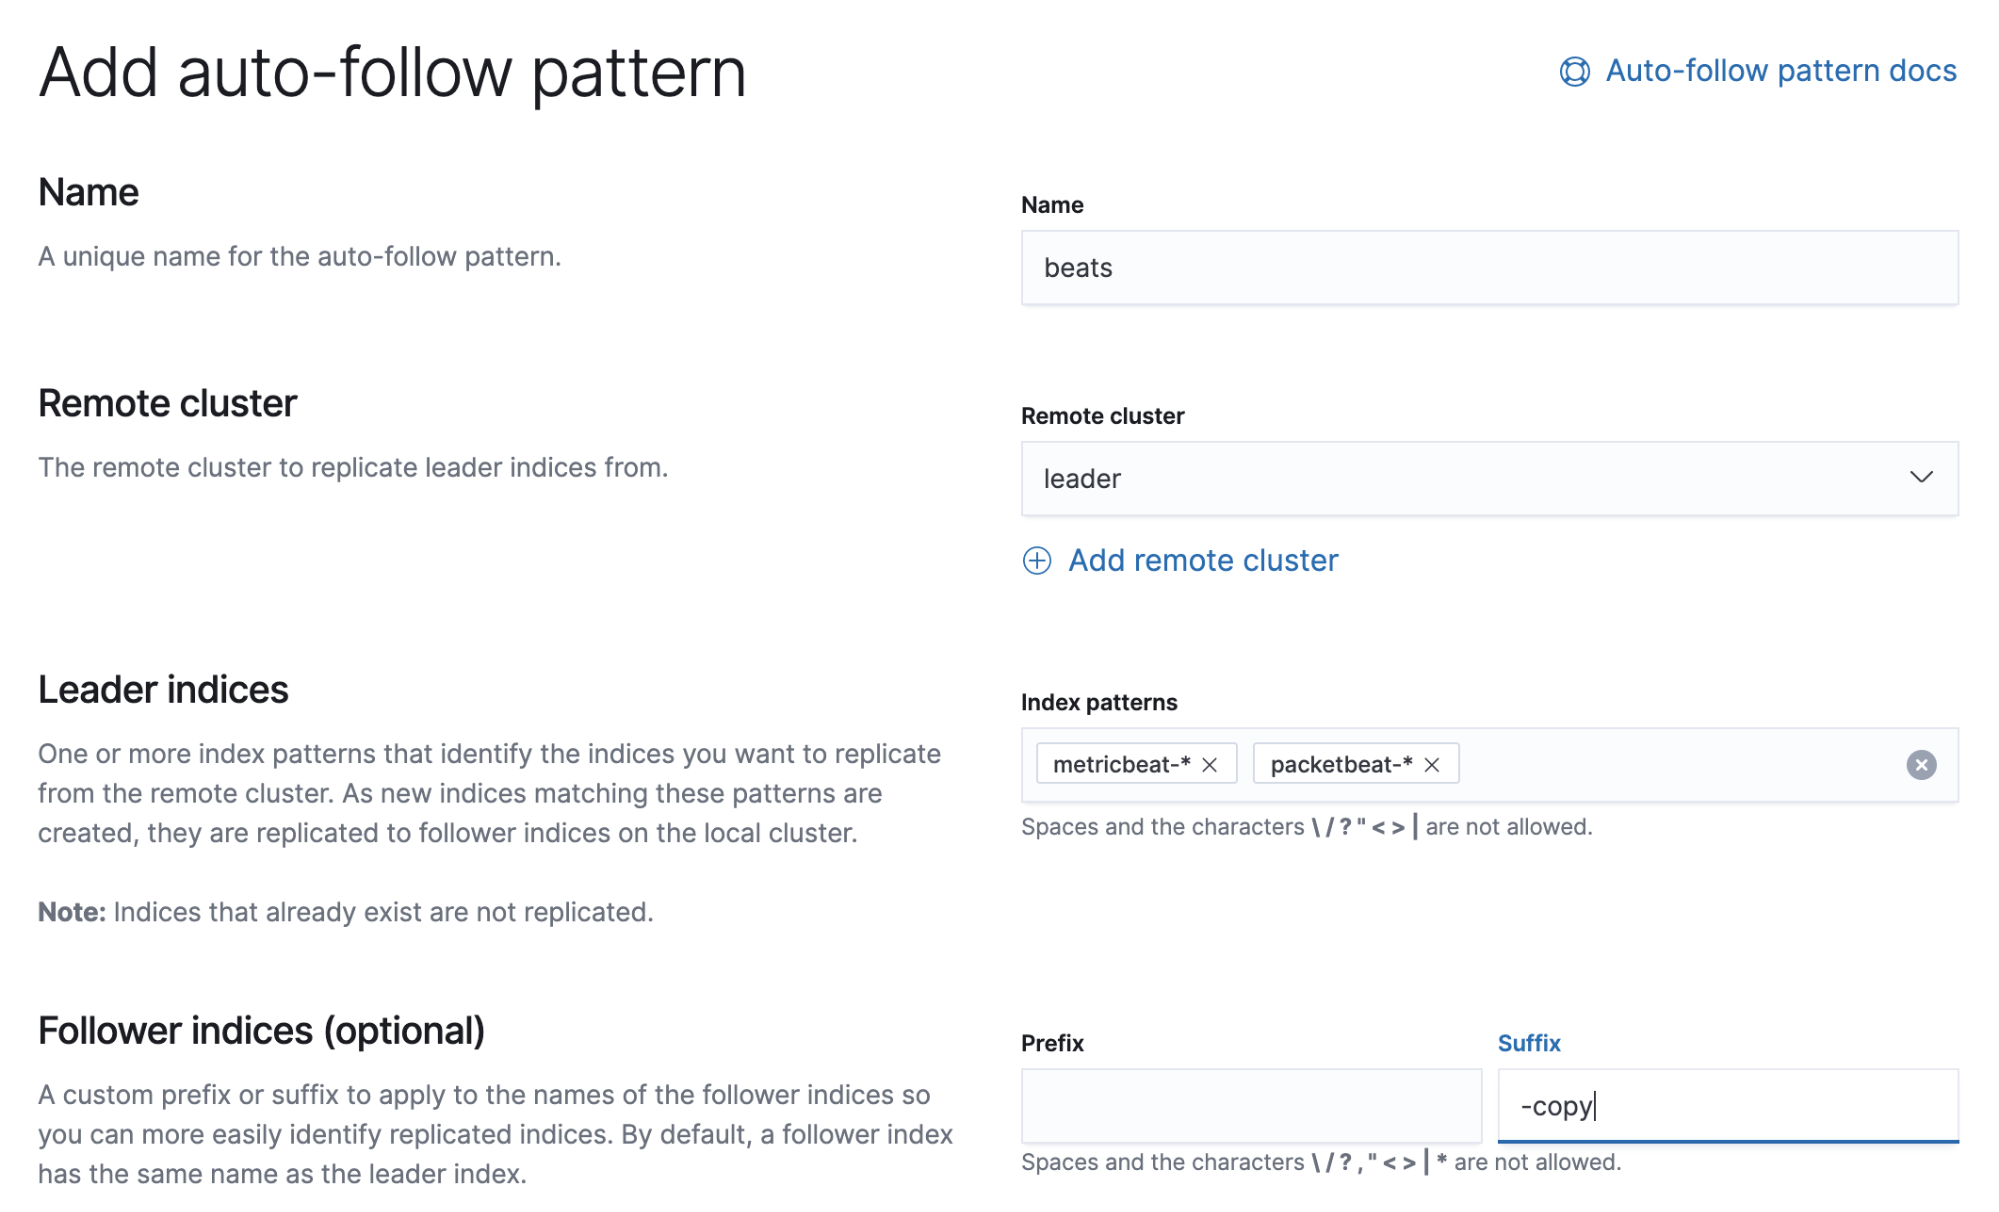 UI for adding an auto-follow pattern